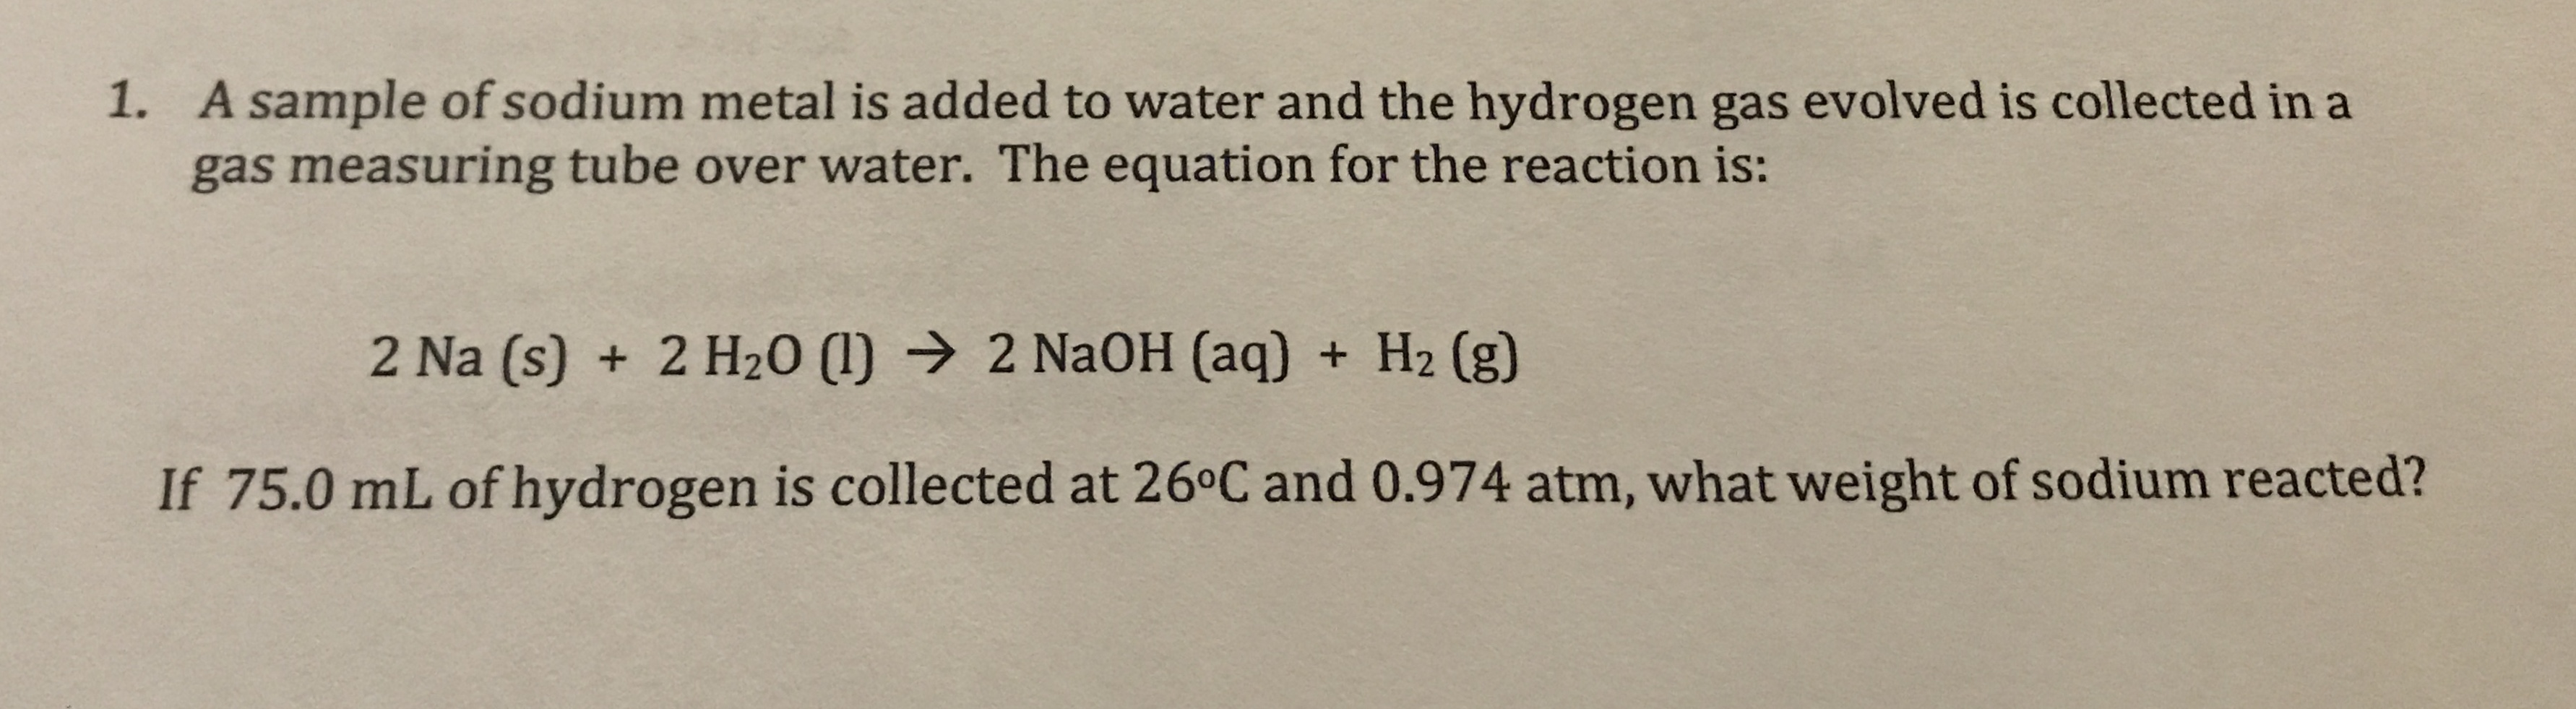 1. A sample of sodium metal is added to water and the hydrogen gas evolved is collected in a
gas measuring tube over water. The equation for the reaction is:
2 Na (s) + 2 H20 ()
2 NaOH (aq) H2 (g)
If 75.0 mL of hydrogen is collected at 26°C and 0.974 atm, what weight of sodium reacted?
